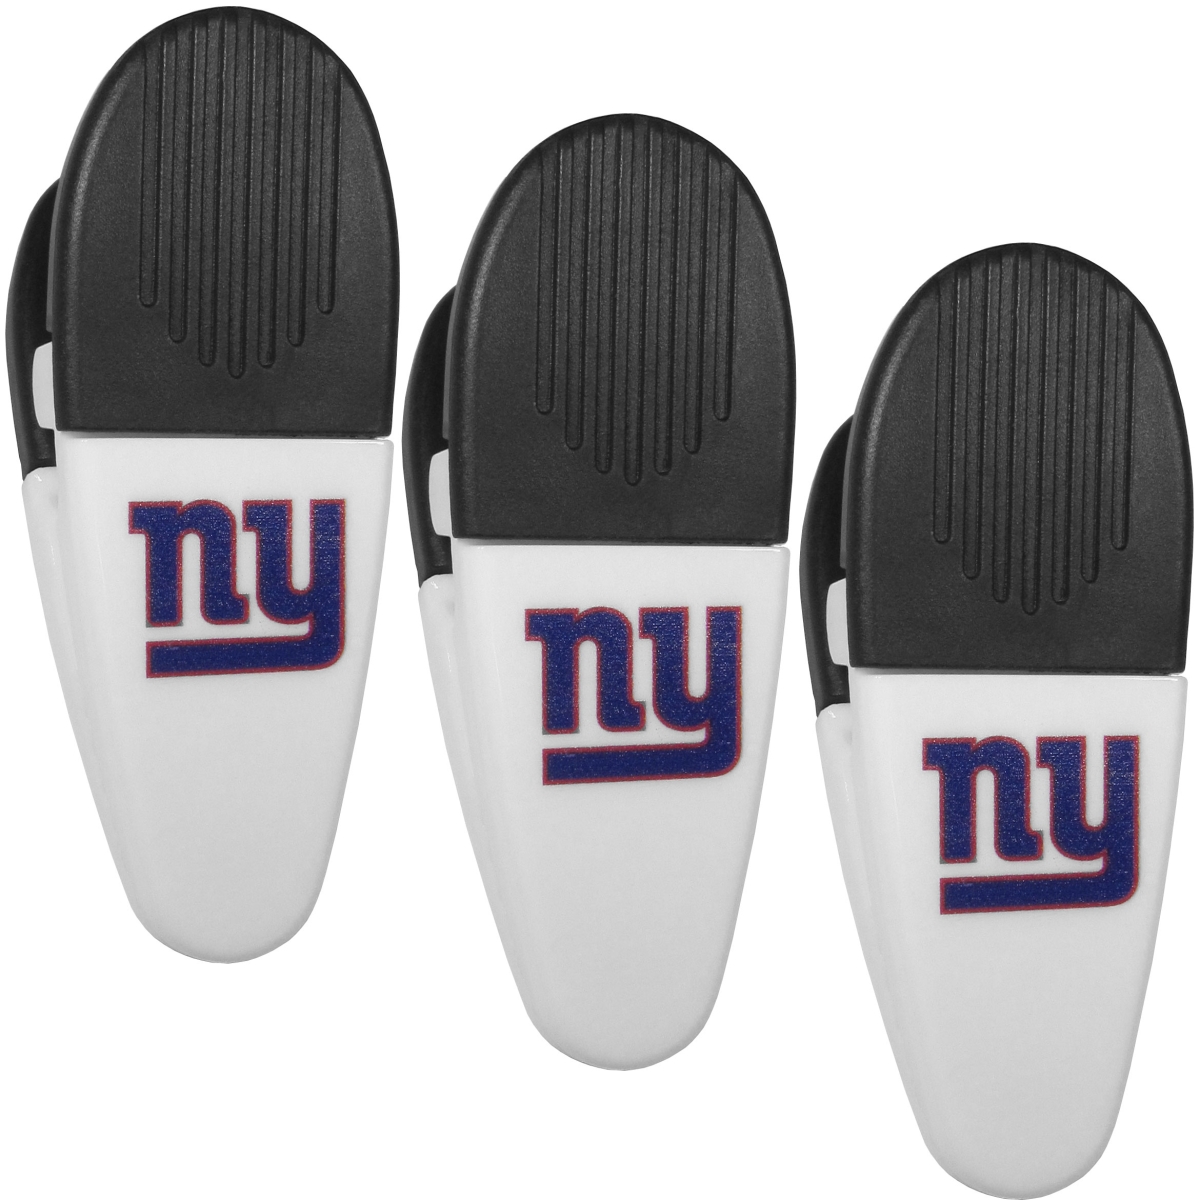 Picture of Siskiyou F3CM090 Unisex NFL New York Giants Mini Chip Clip Magnets - Pack of 3